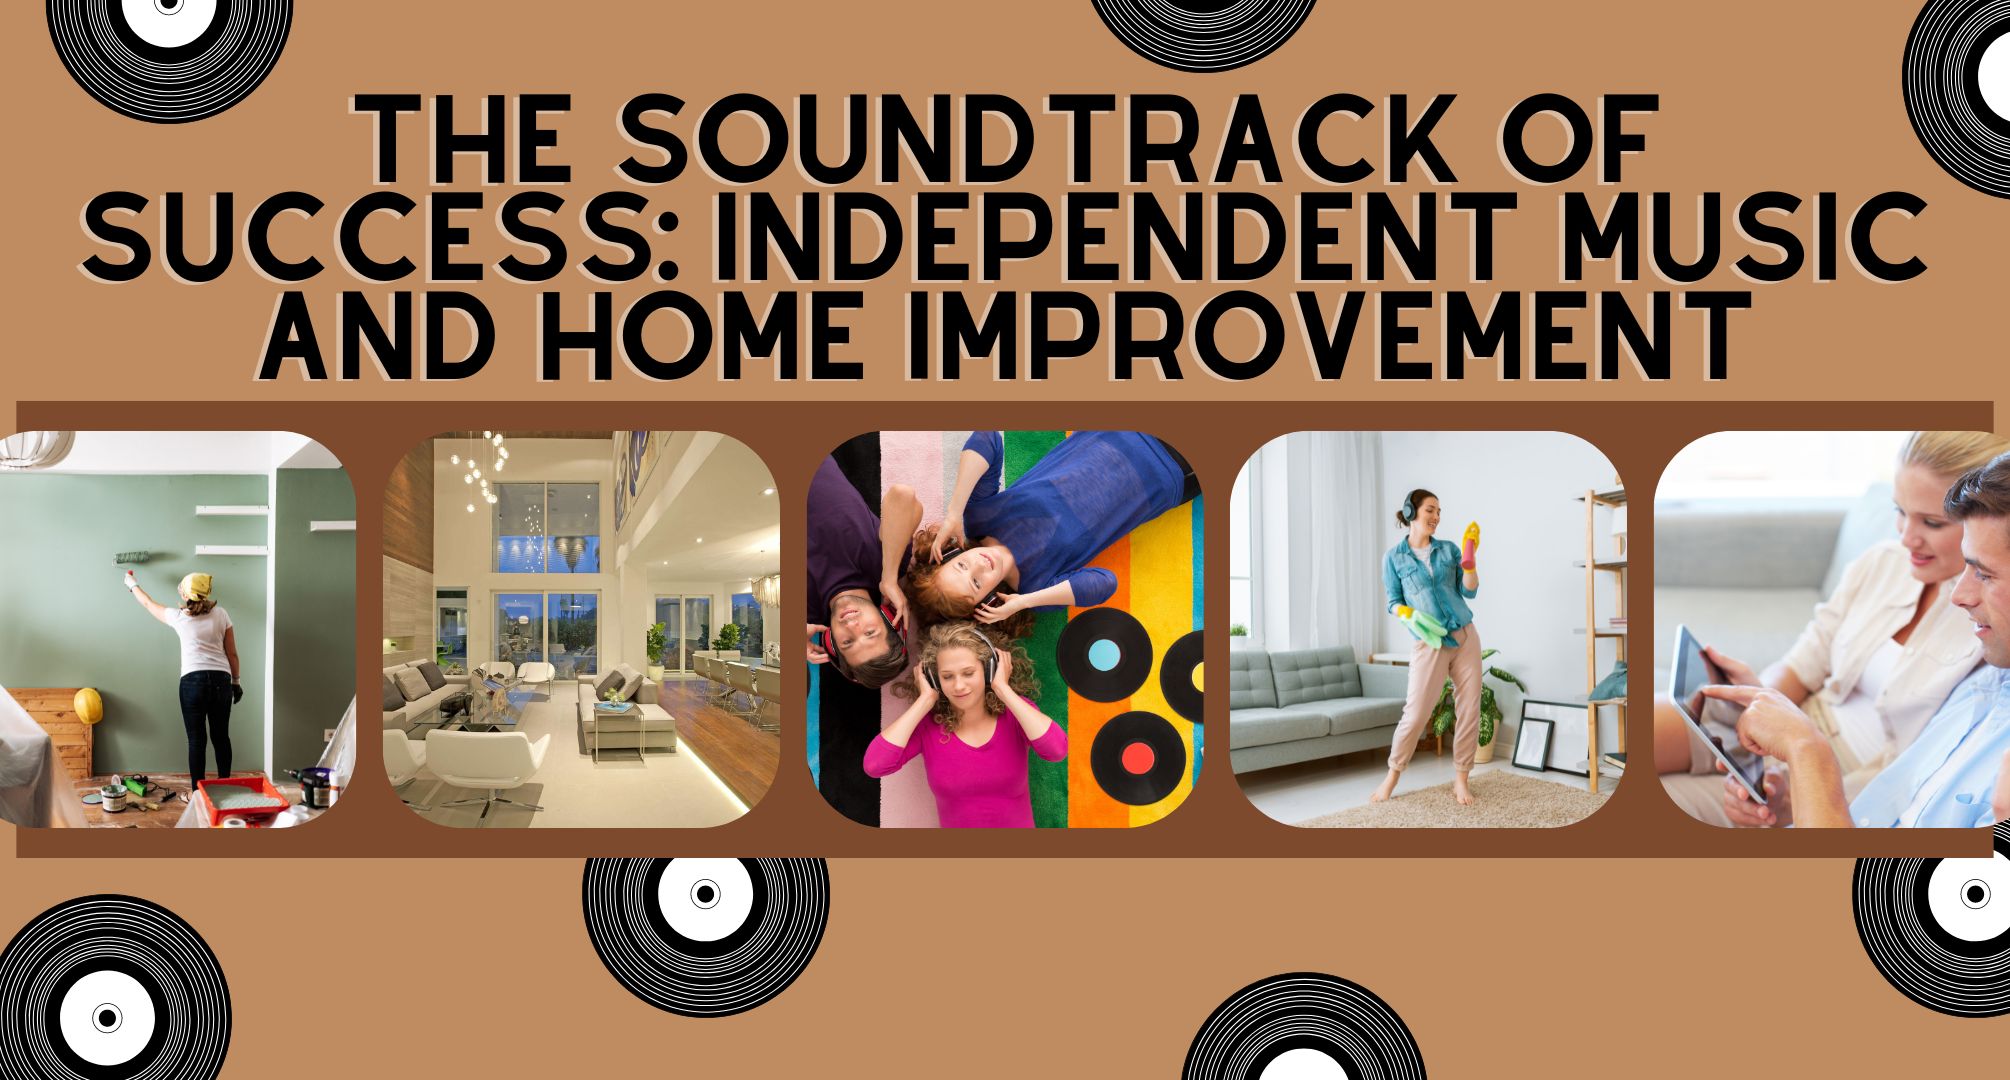 The Soundtrack of Success: Independent Music and Home Improvement